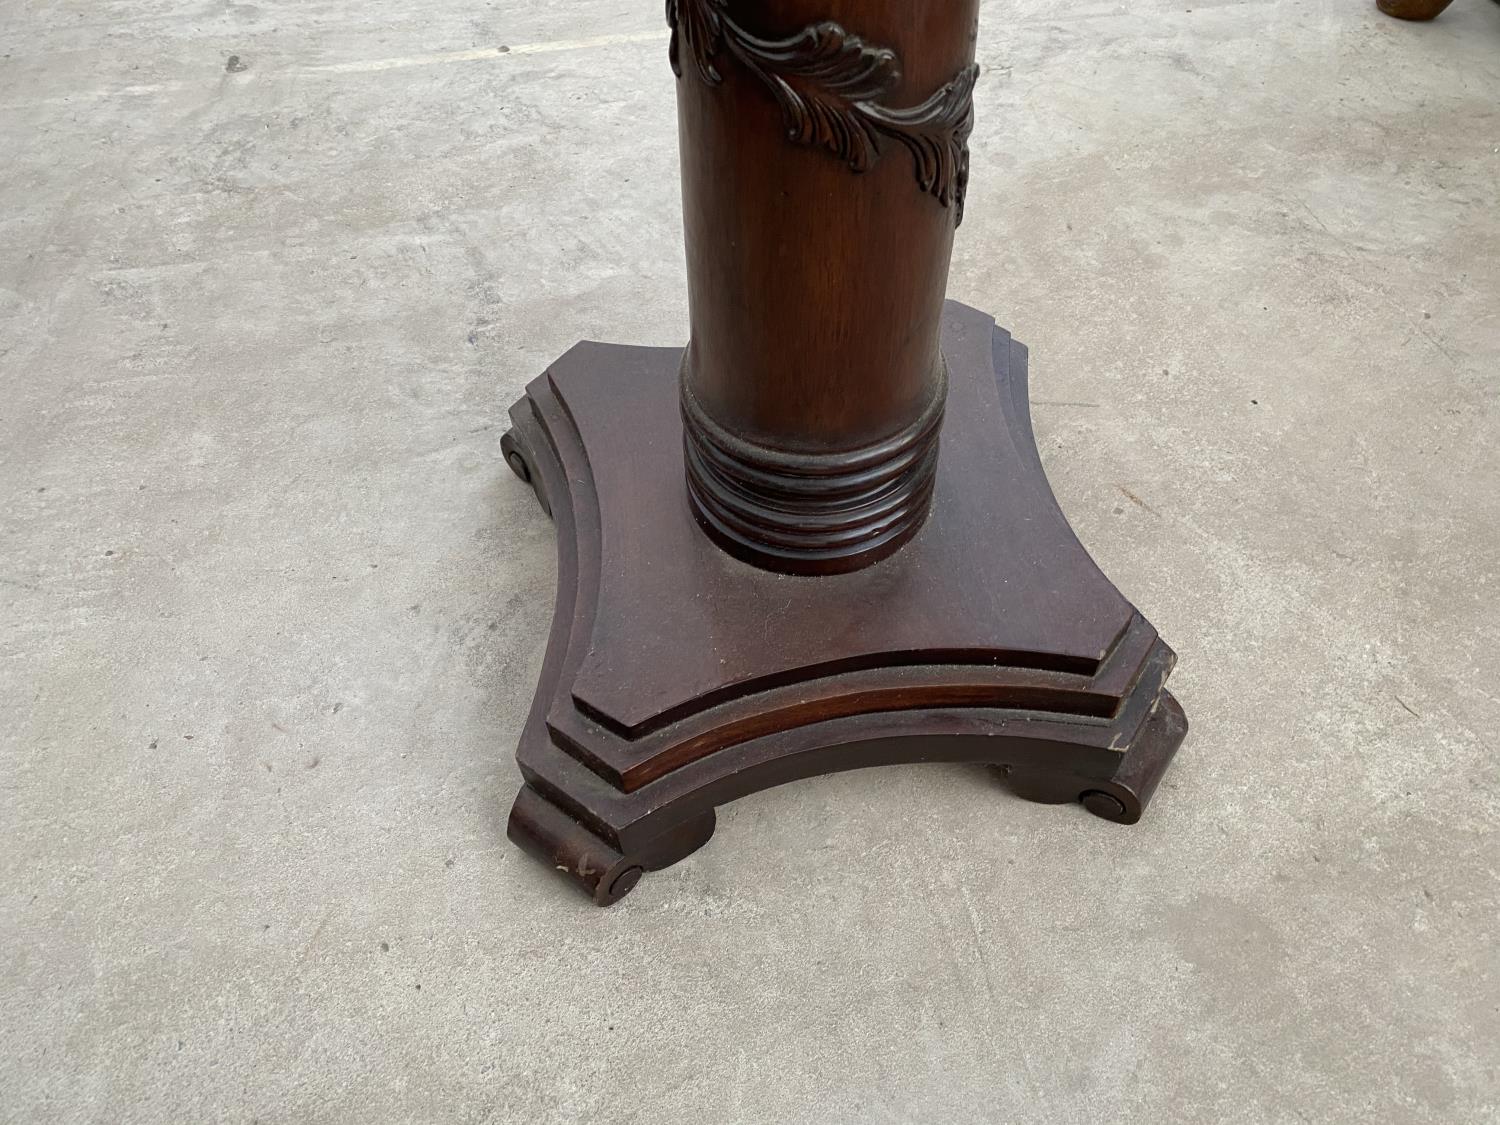 A MAHOGANY TORCHERE ON CENTRE ACANTHUS LEAF DECORATED COLUMN AND PEDESTAL BASE - Image 4 of 4